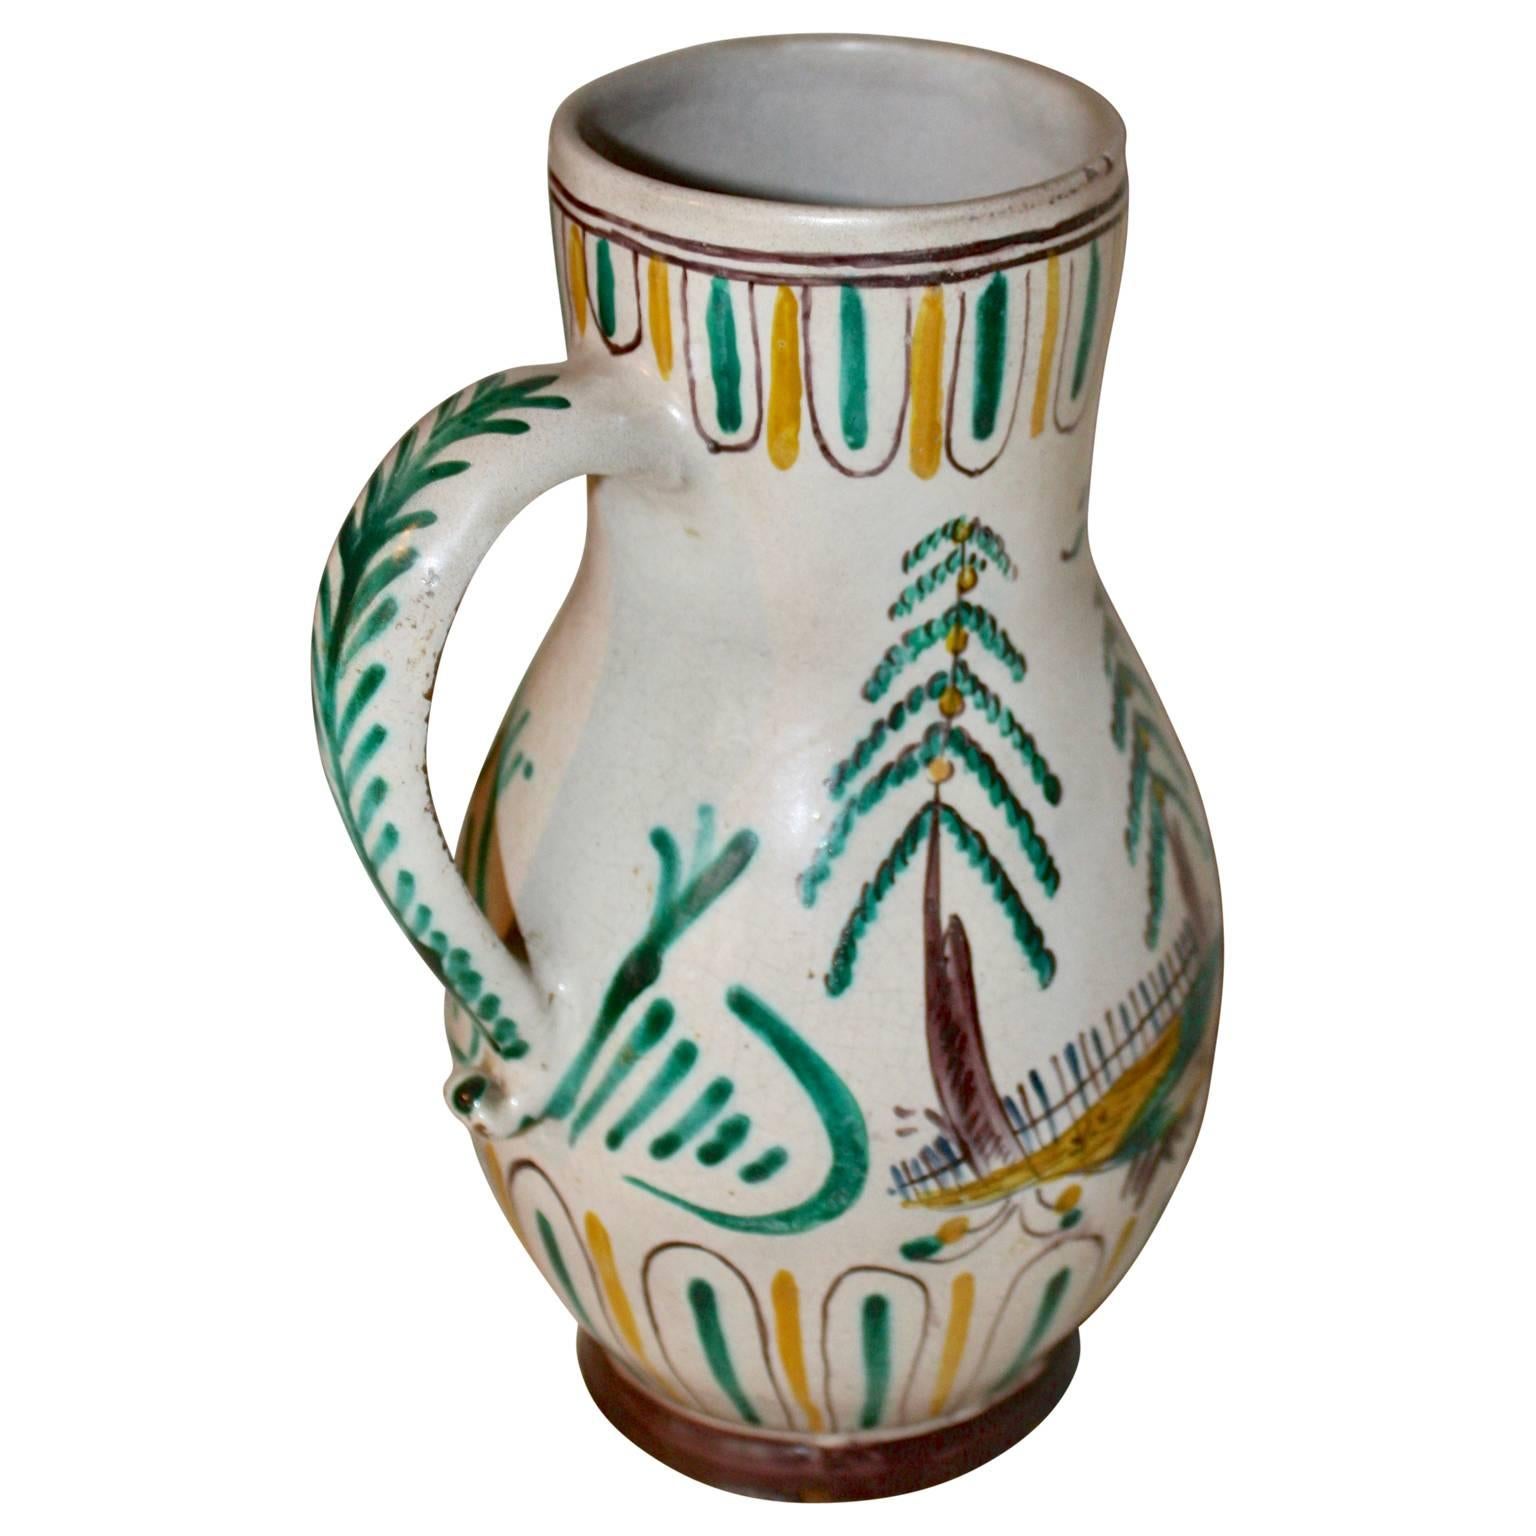 Beautiful German faience jug from one of the Northern German factories.